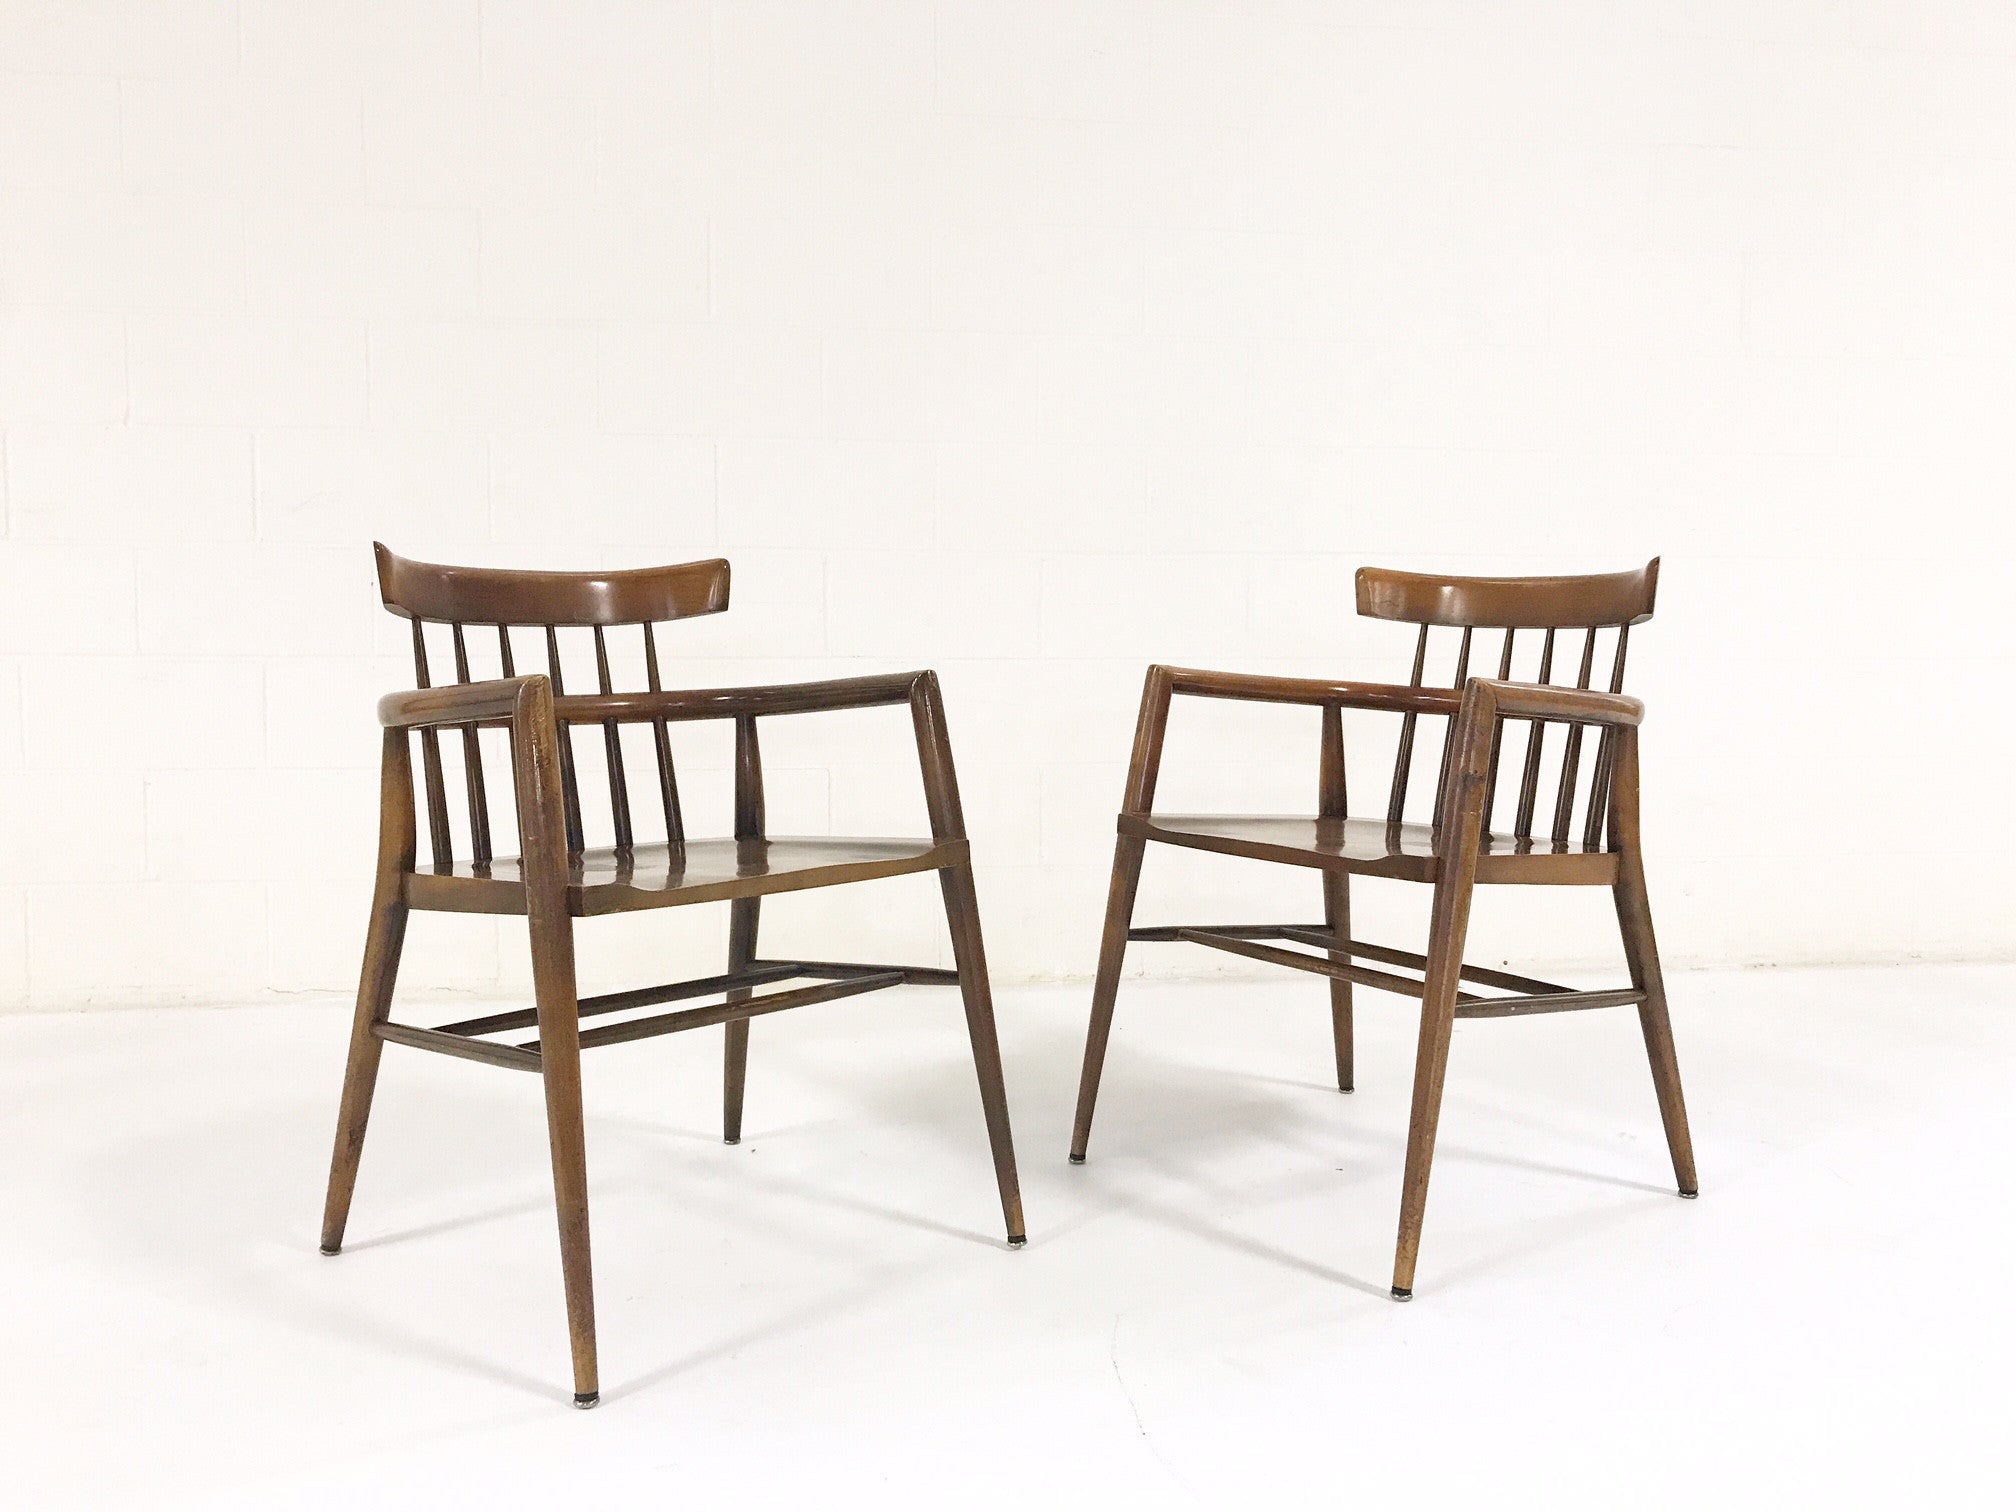 Captain Chairs with Brazilian Sheepskins, pair - FORSYTH